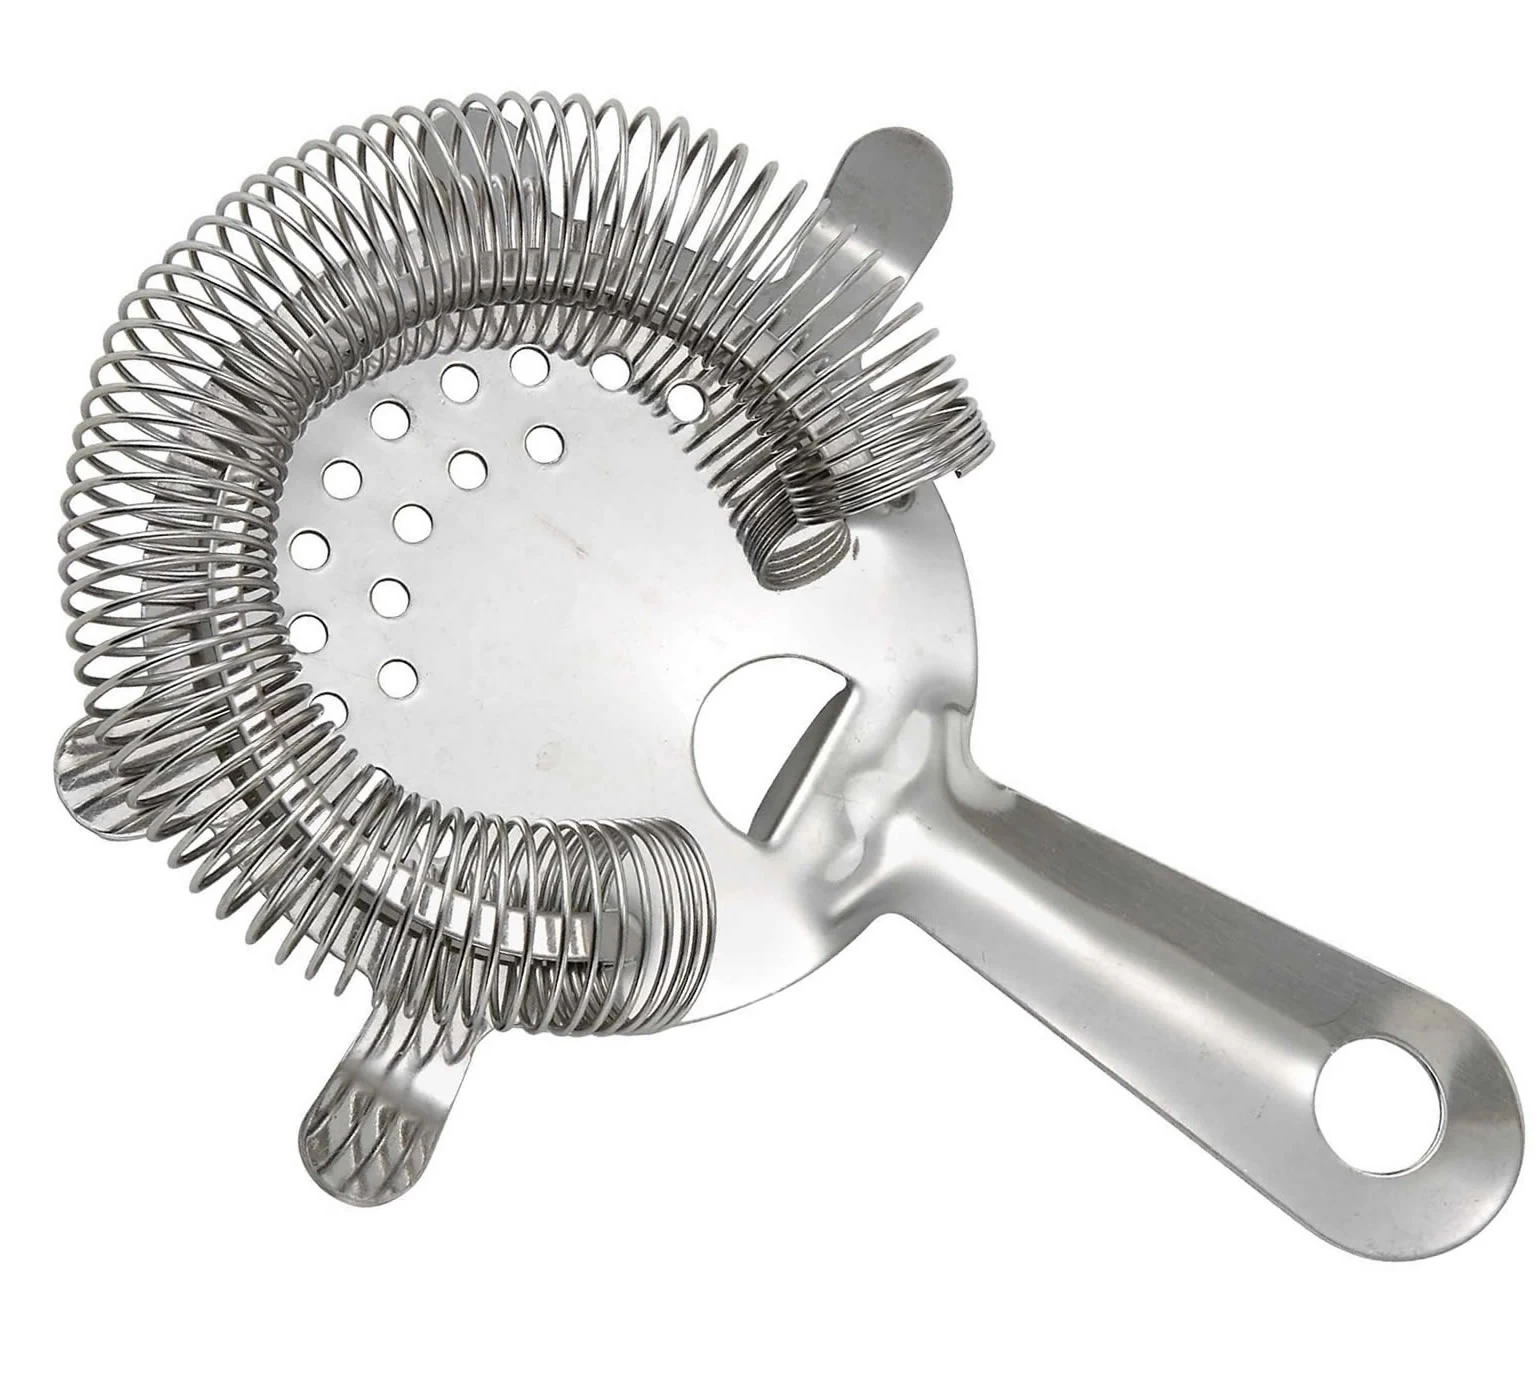 Stainless Steel Copper Plated Bar Strainer, china Stainless Steel Housewares on sales